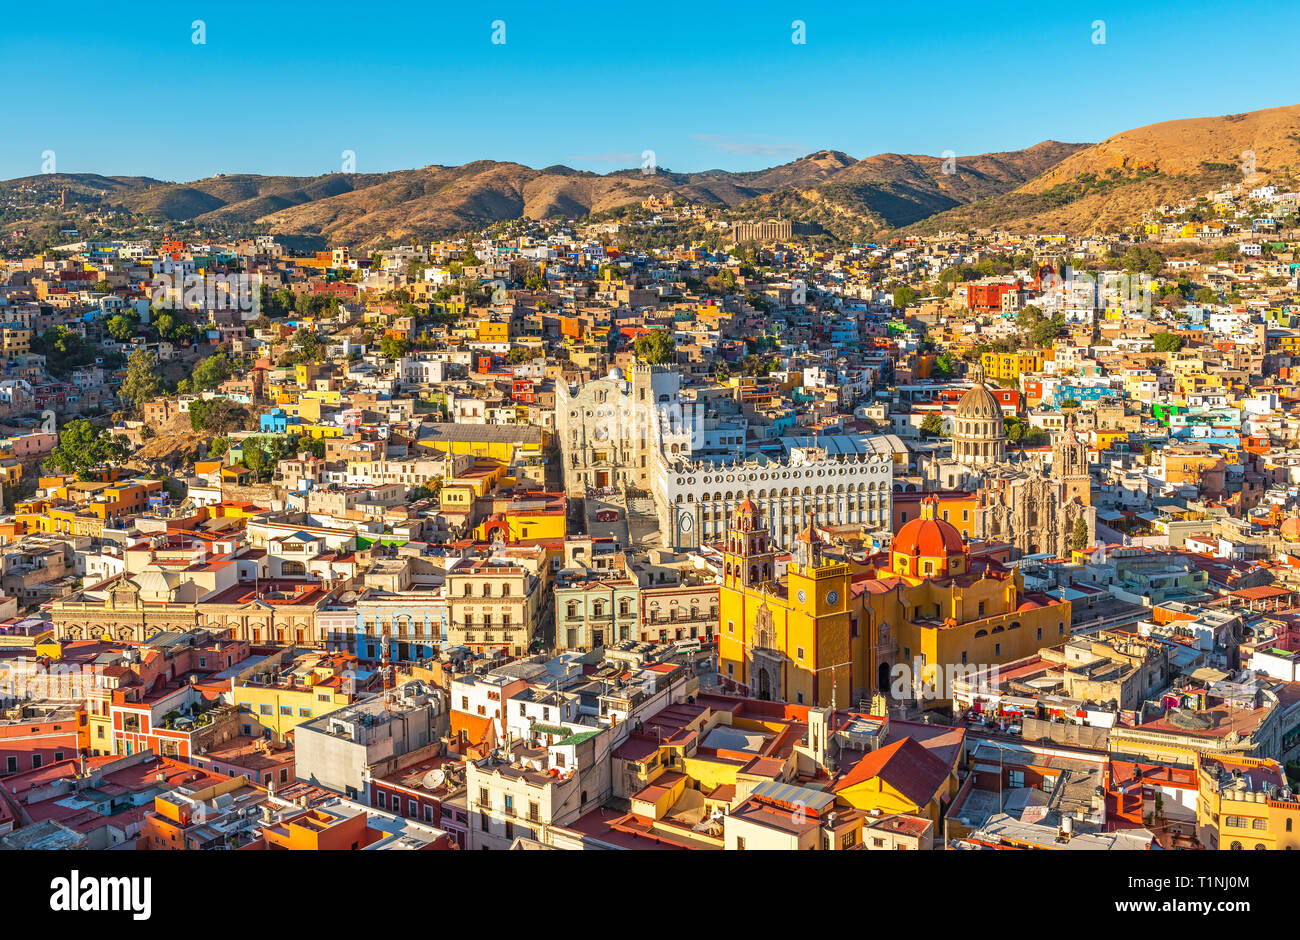 The colourful urban skyline of Guanajuato city during sunset, Mexico. Stock Photo